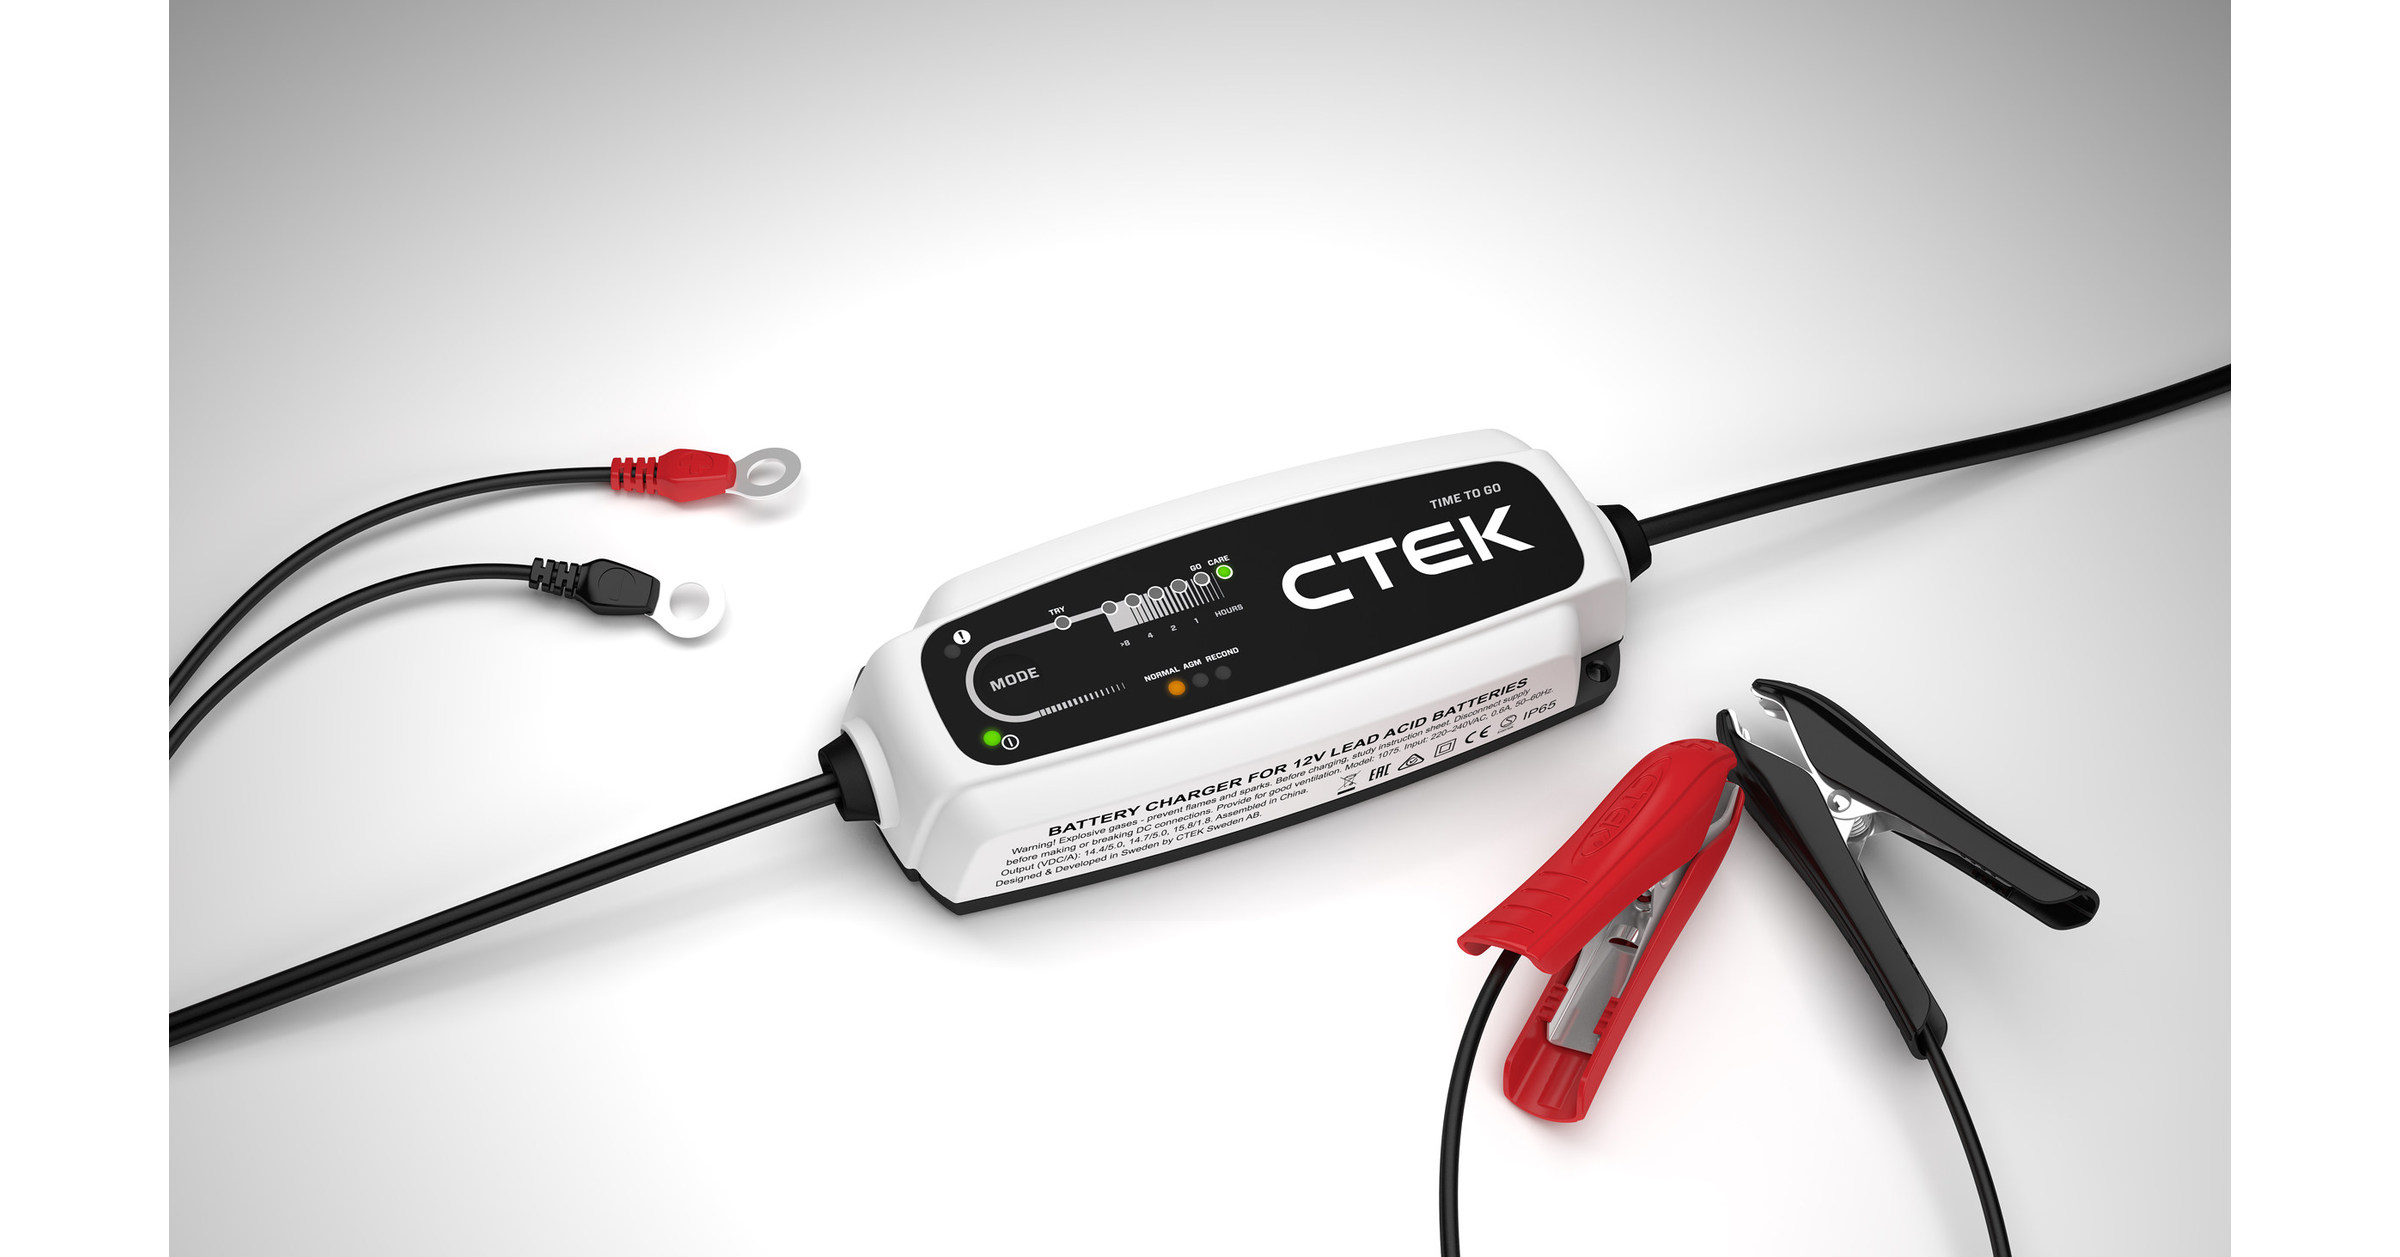 CTEK CT5 Charger Tells You When It's Time to Go